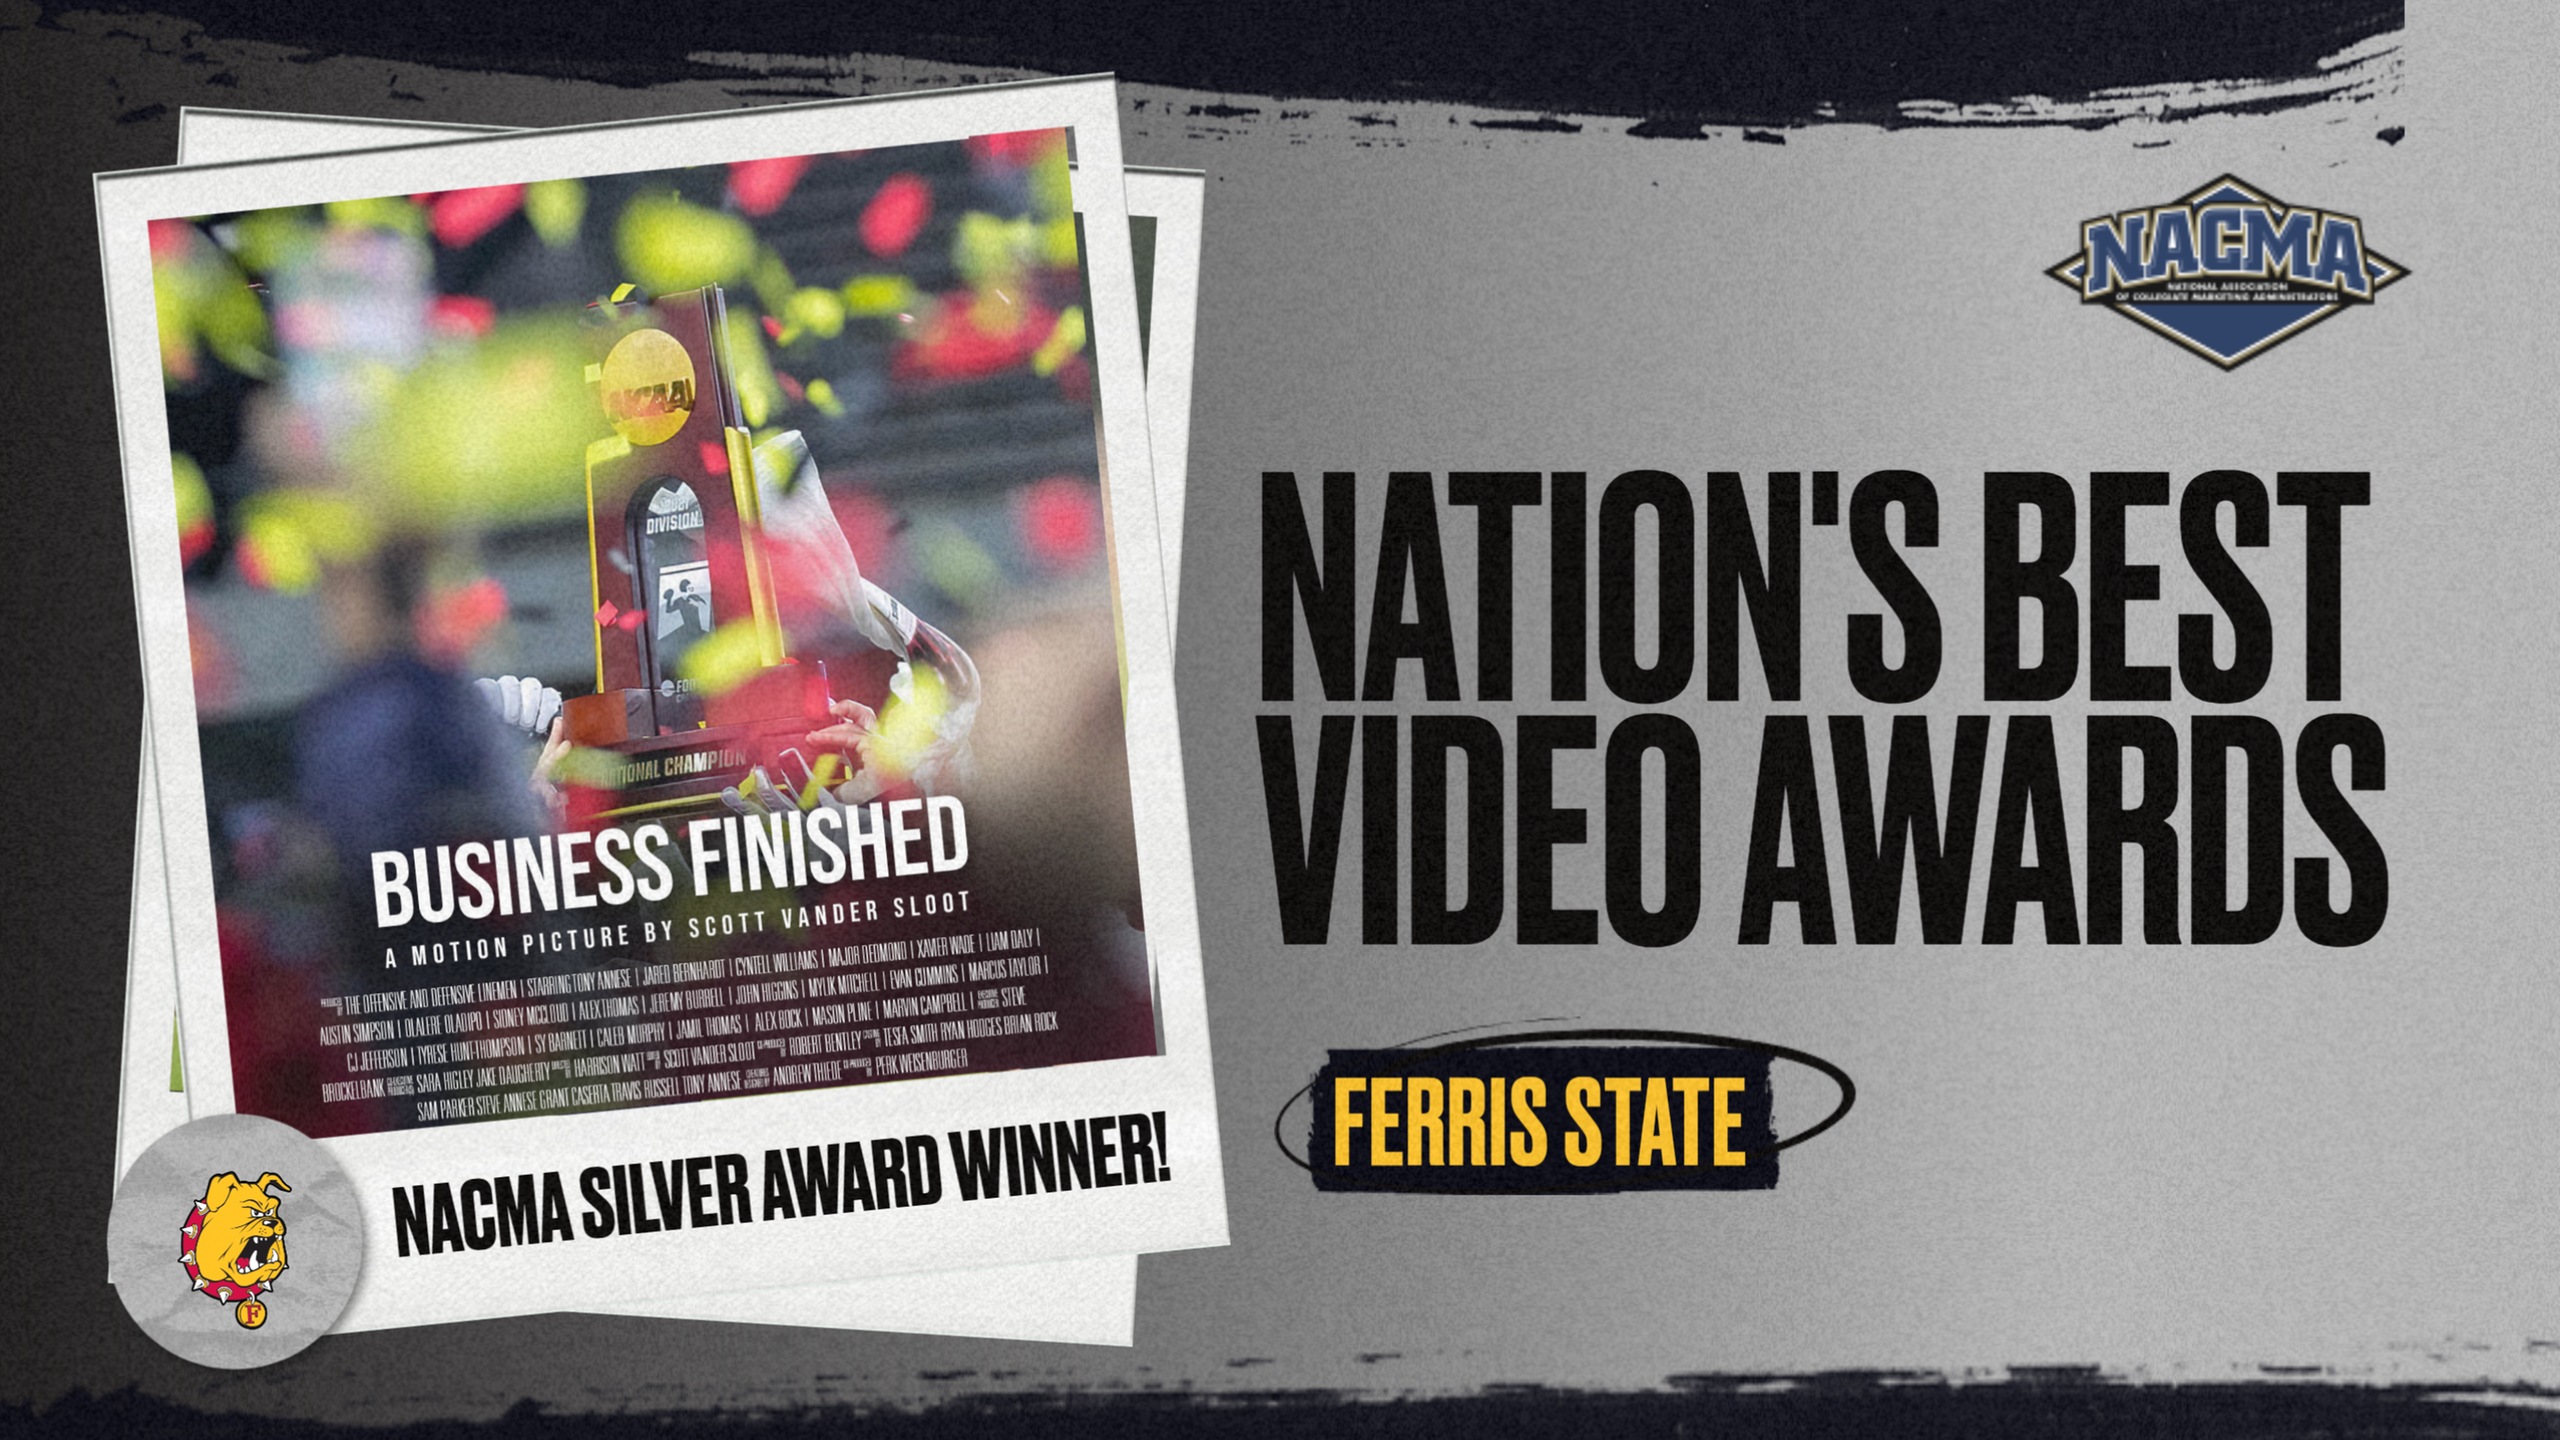 Business Finished National Title Video Earns Distinction As One Of Nation's Best Digital Video Segments